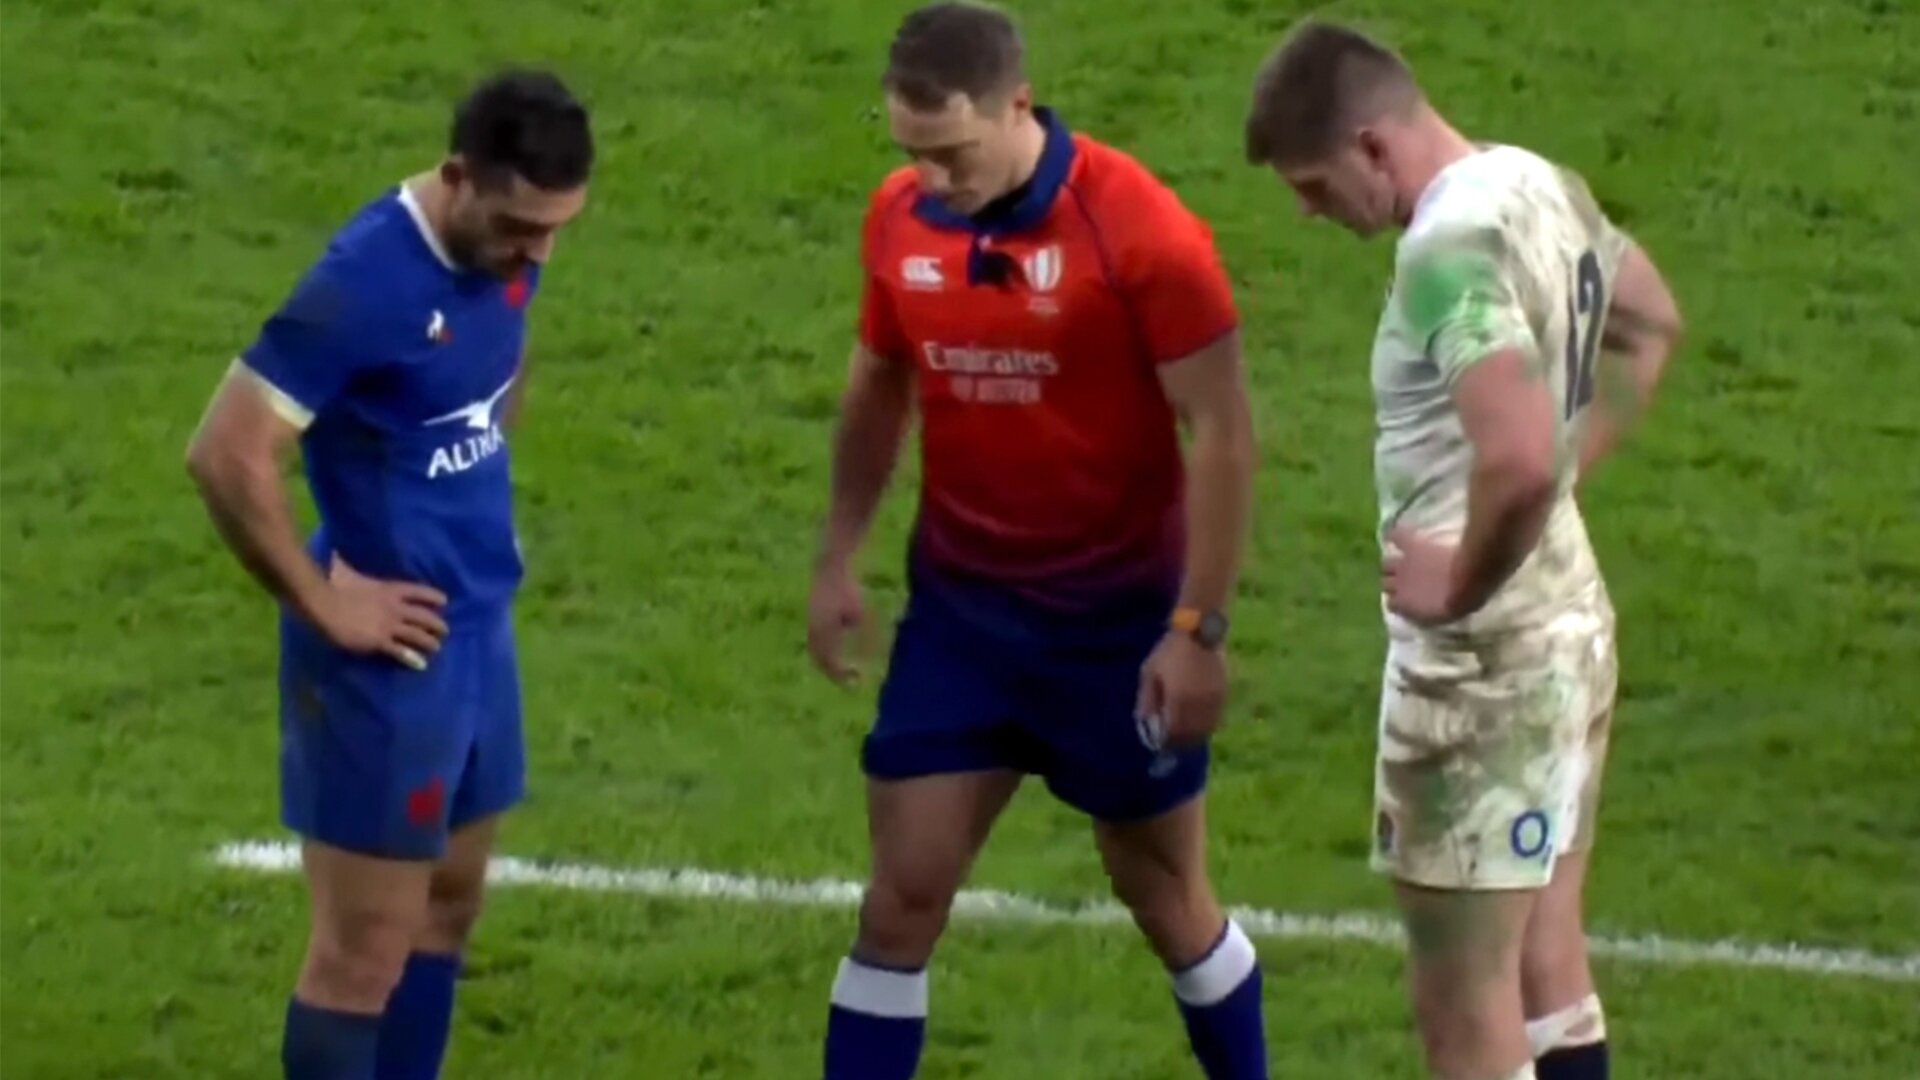 The bizarre coin toss incident in the England vs France match revealed